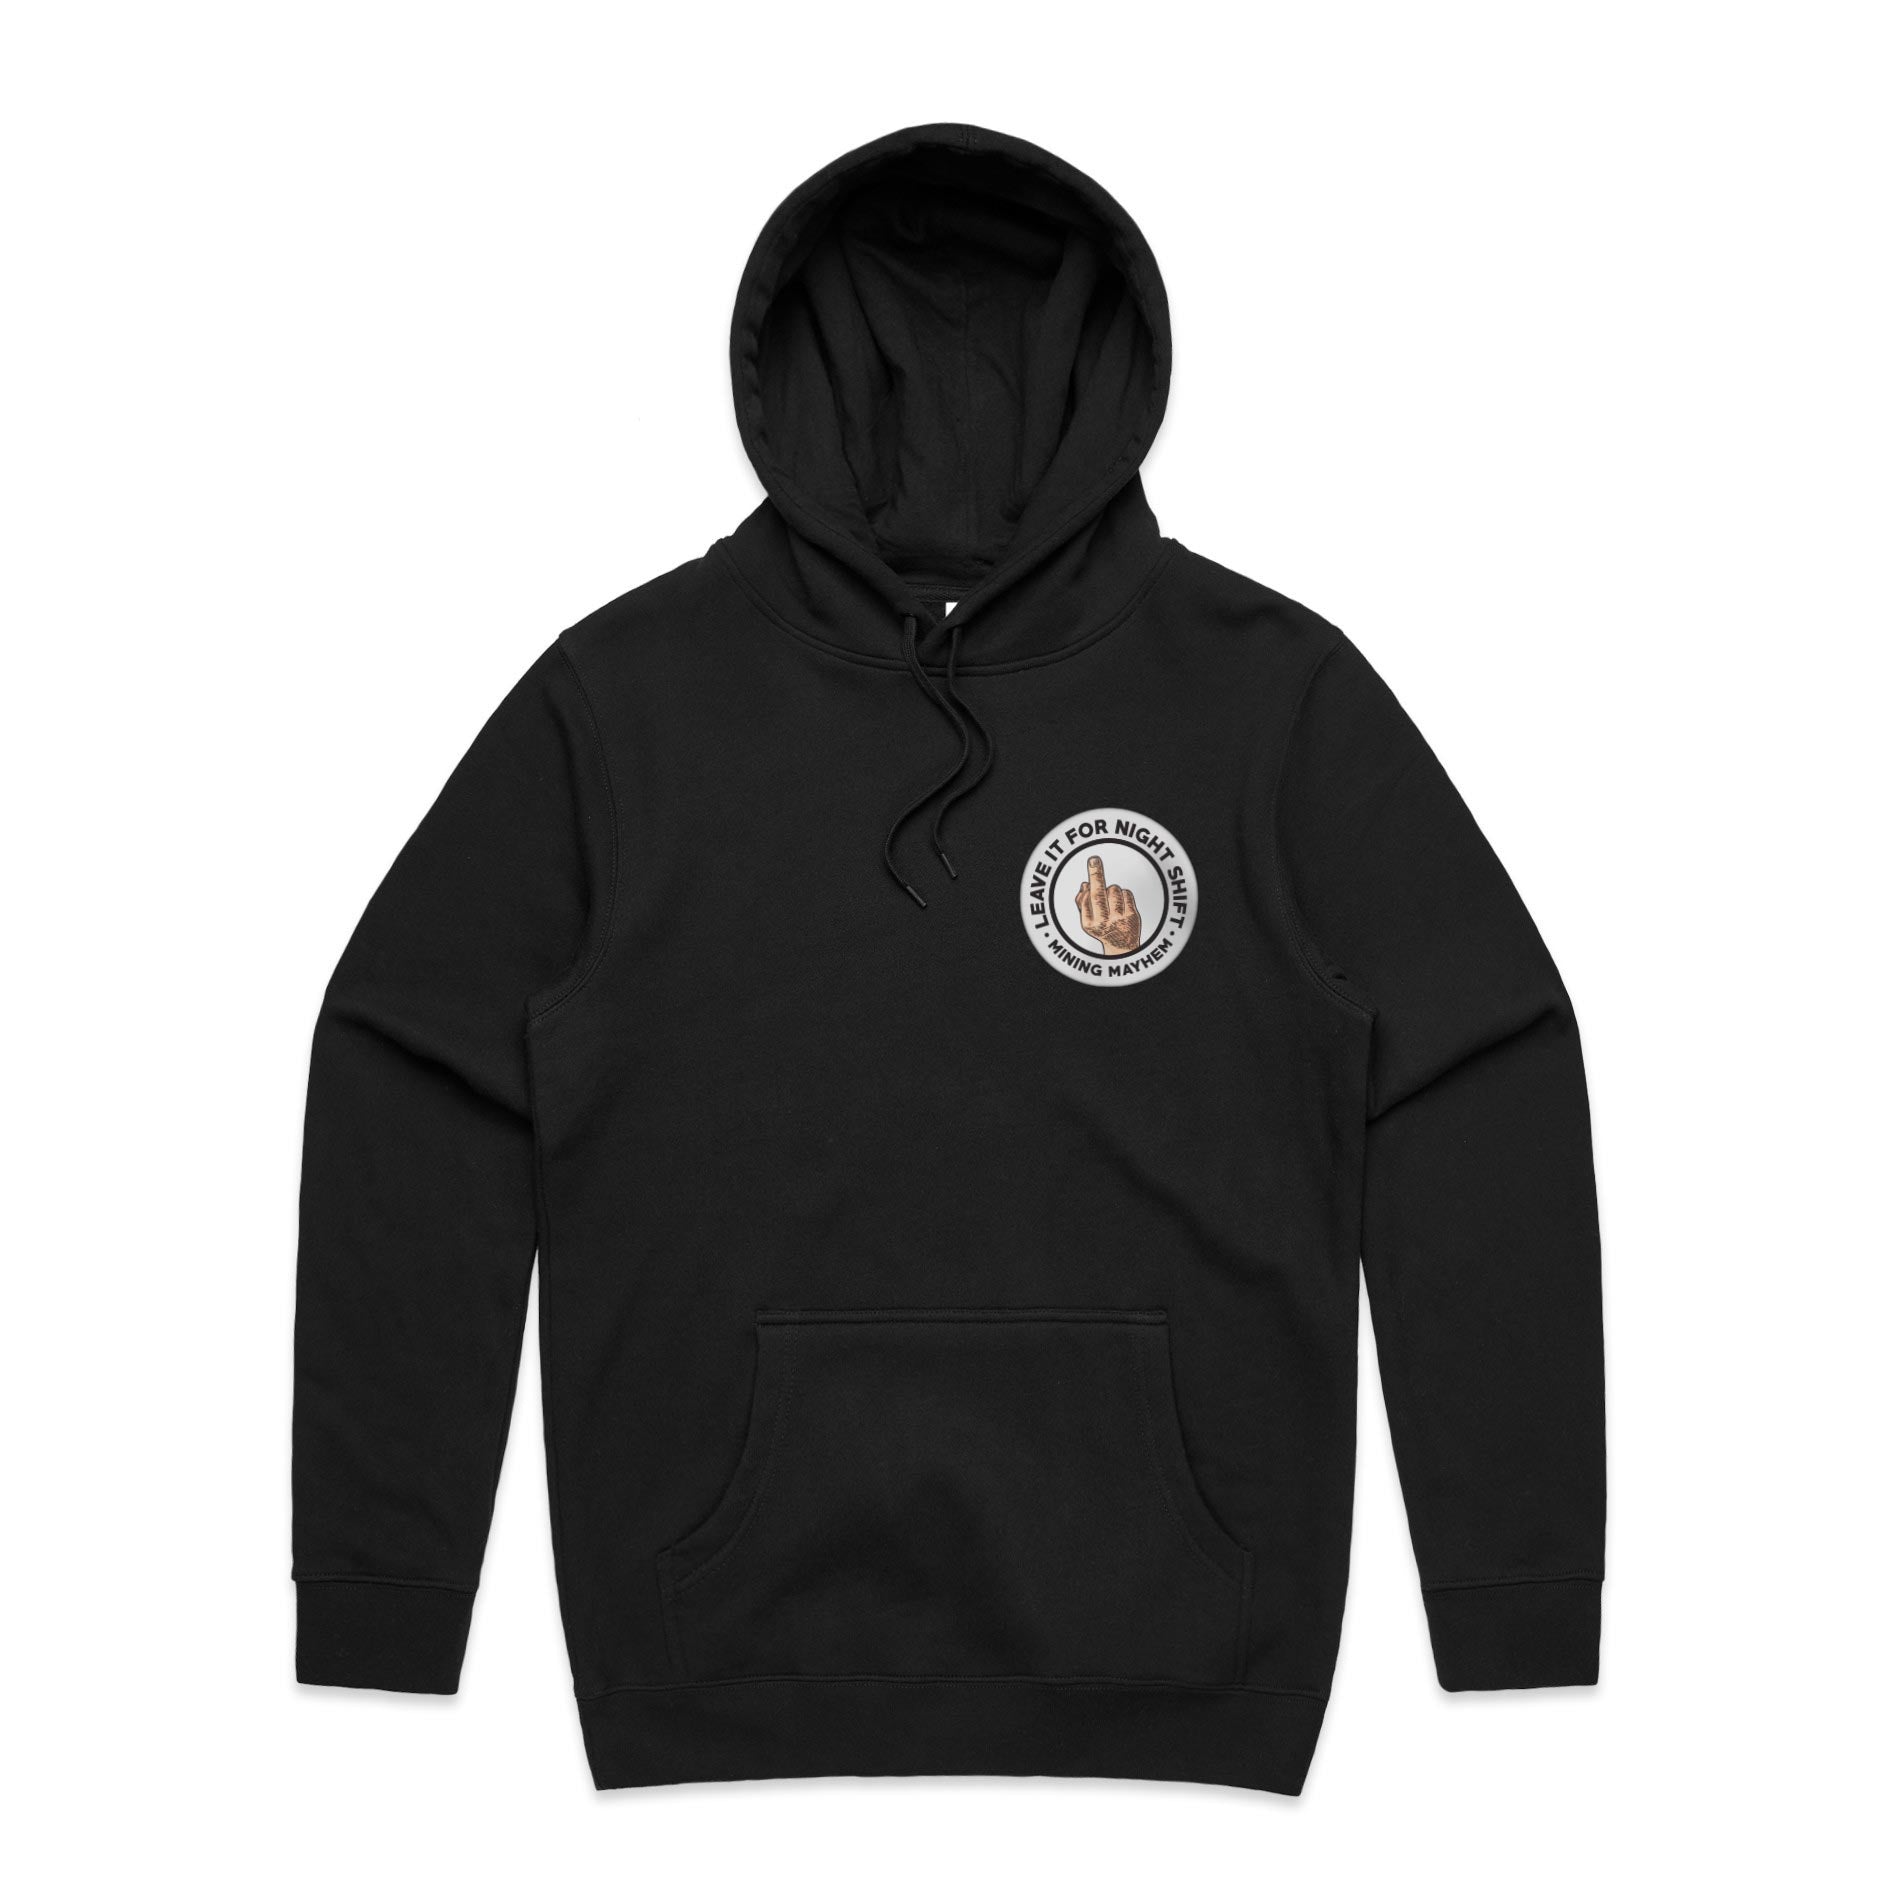 Leave It For Night Shift - Hoodies (Black)